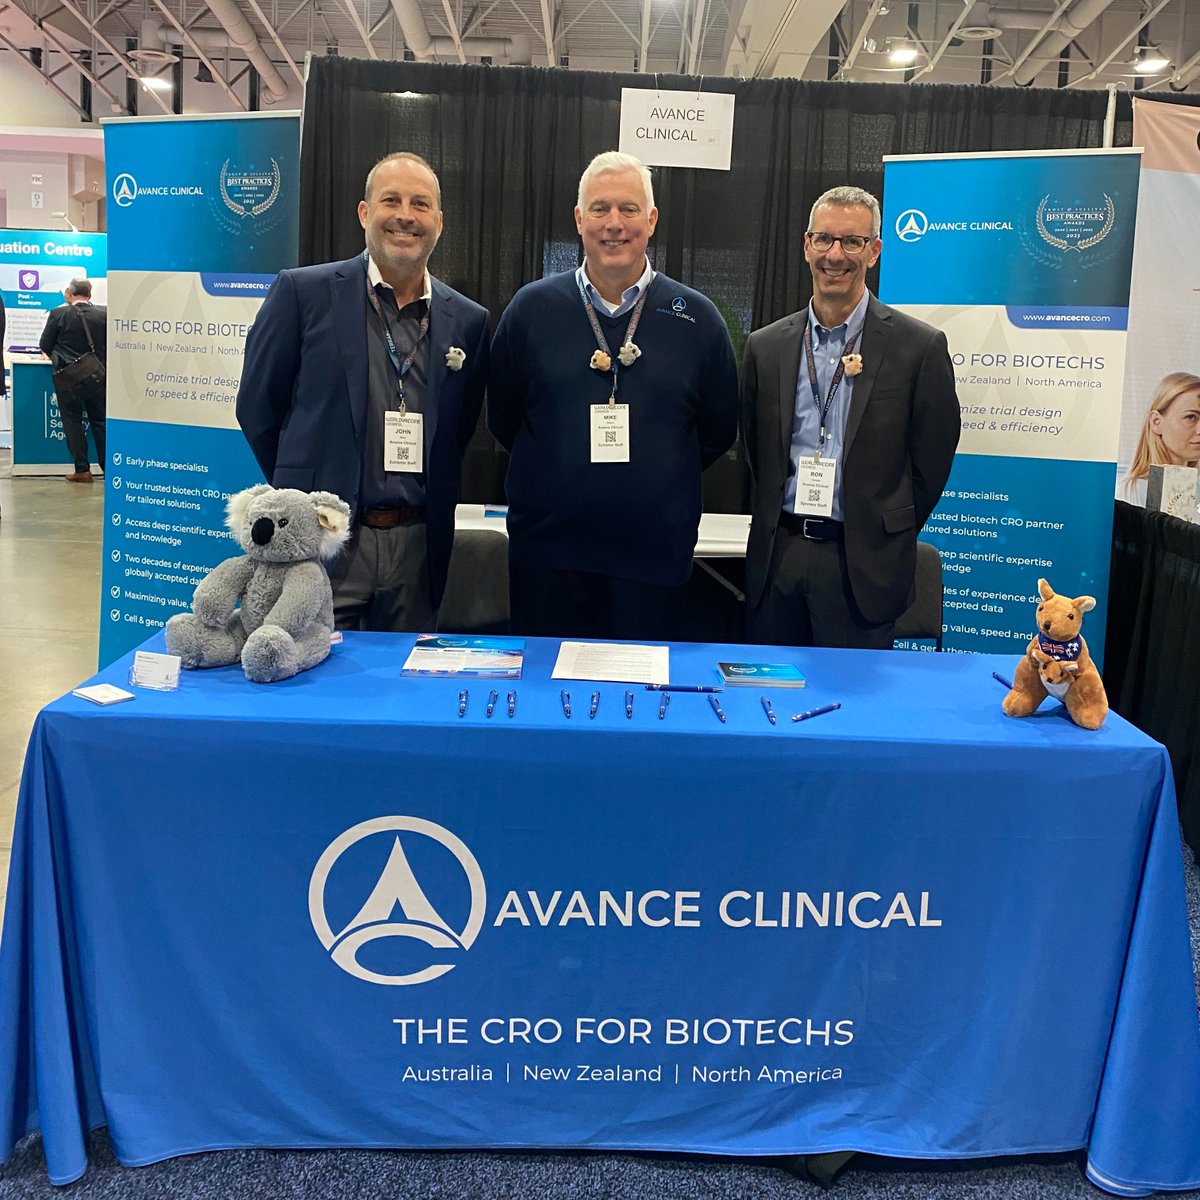 Avance Clinical at #WorldVaccineCongress to Share Latest Vaccine Clinical Trial News Including an HIV-1 Study. Read the press release 👇avancecro.com/avance-clinica… 

#CRO #clinicaltrials #HIVstudy #USA #AustralianAdvantage #news #biotech @vaccinenation